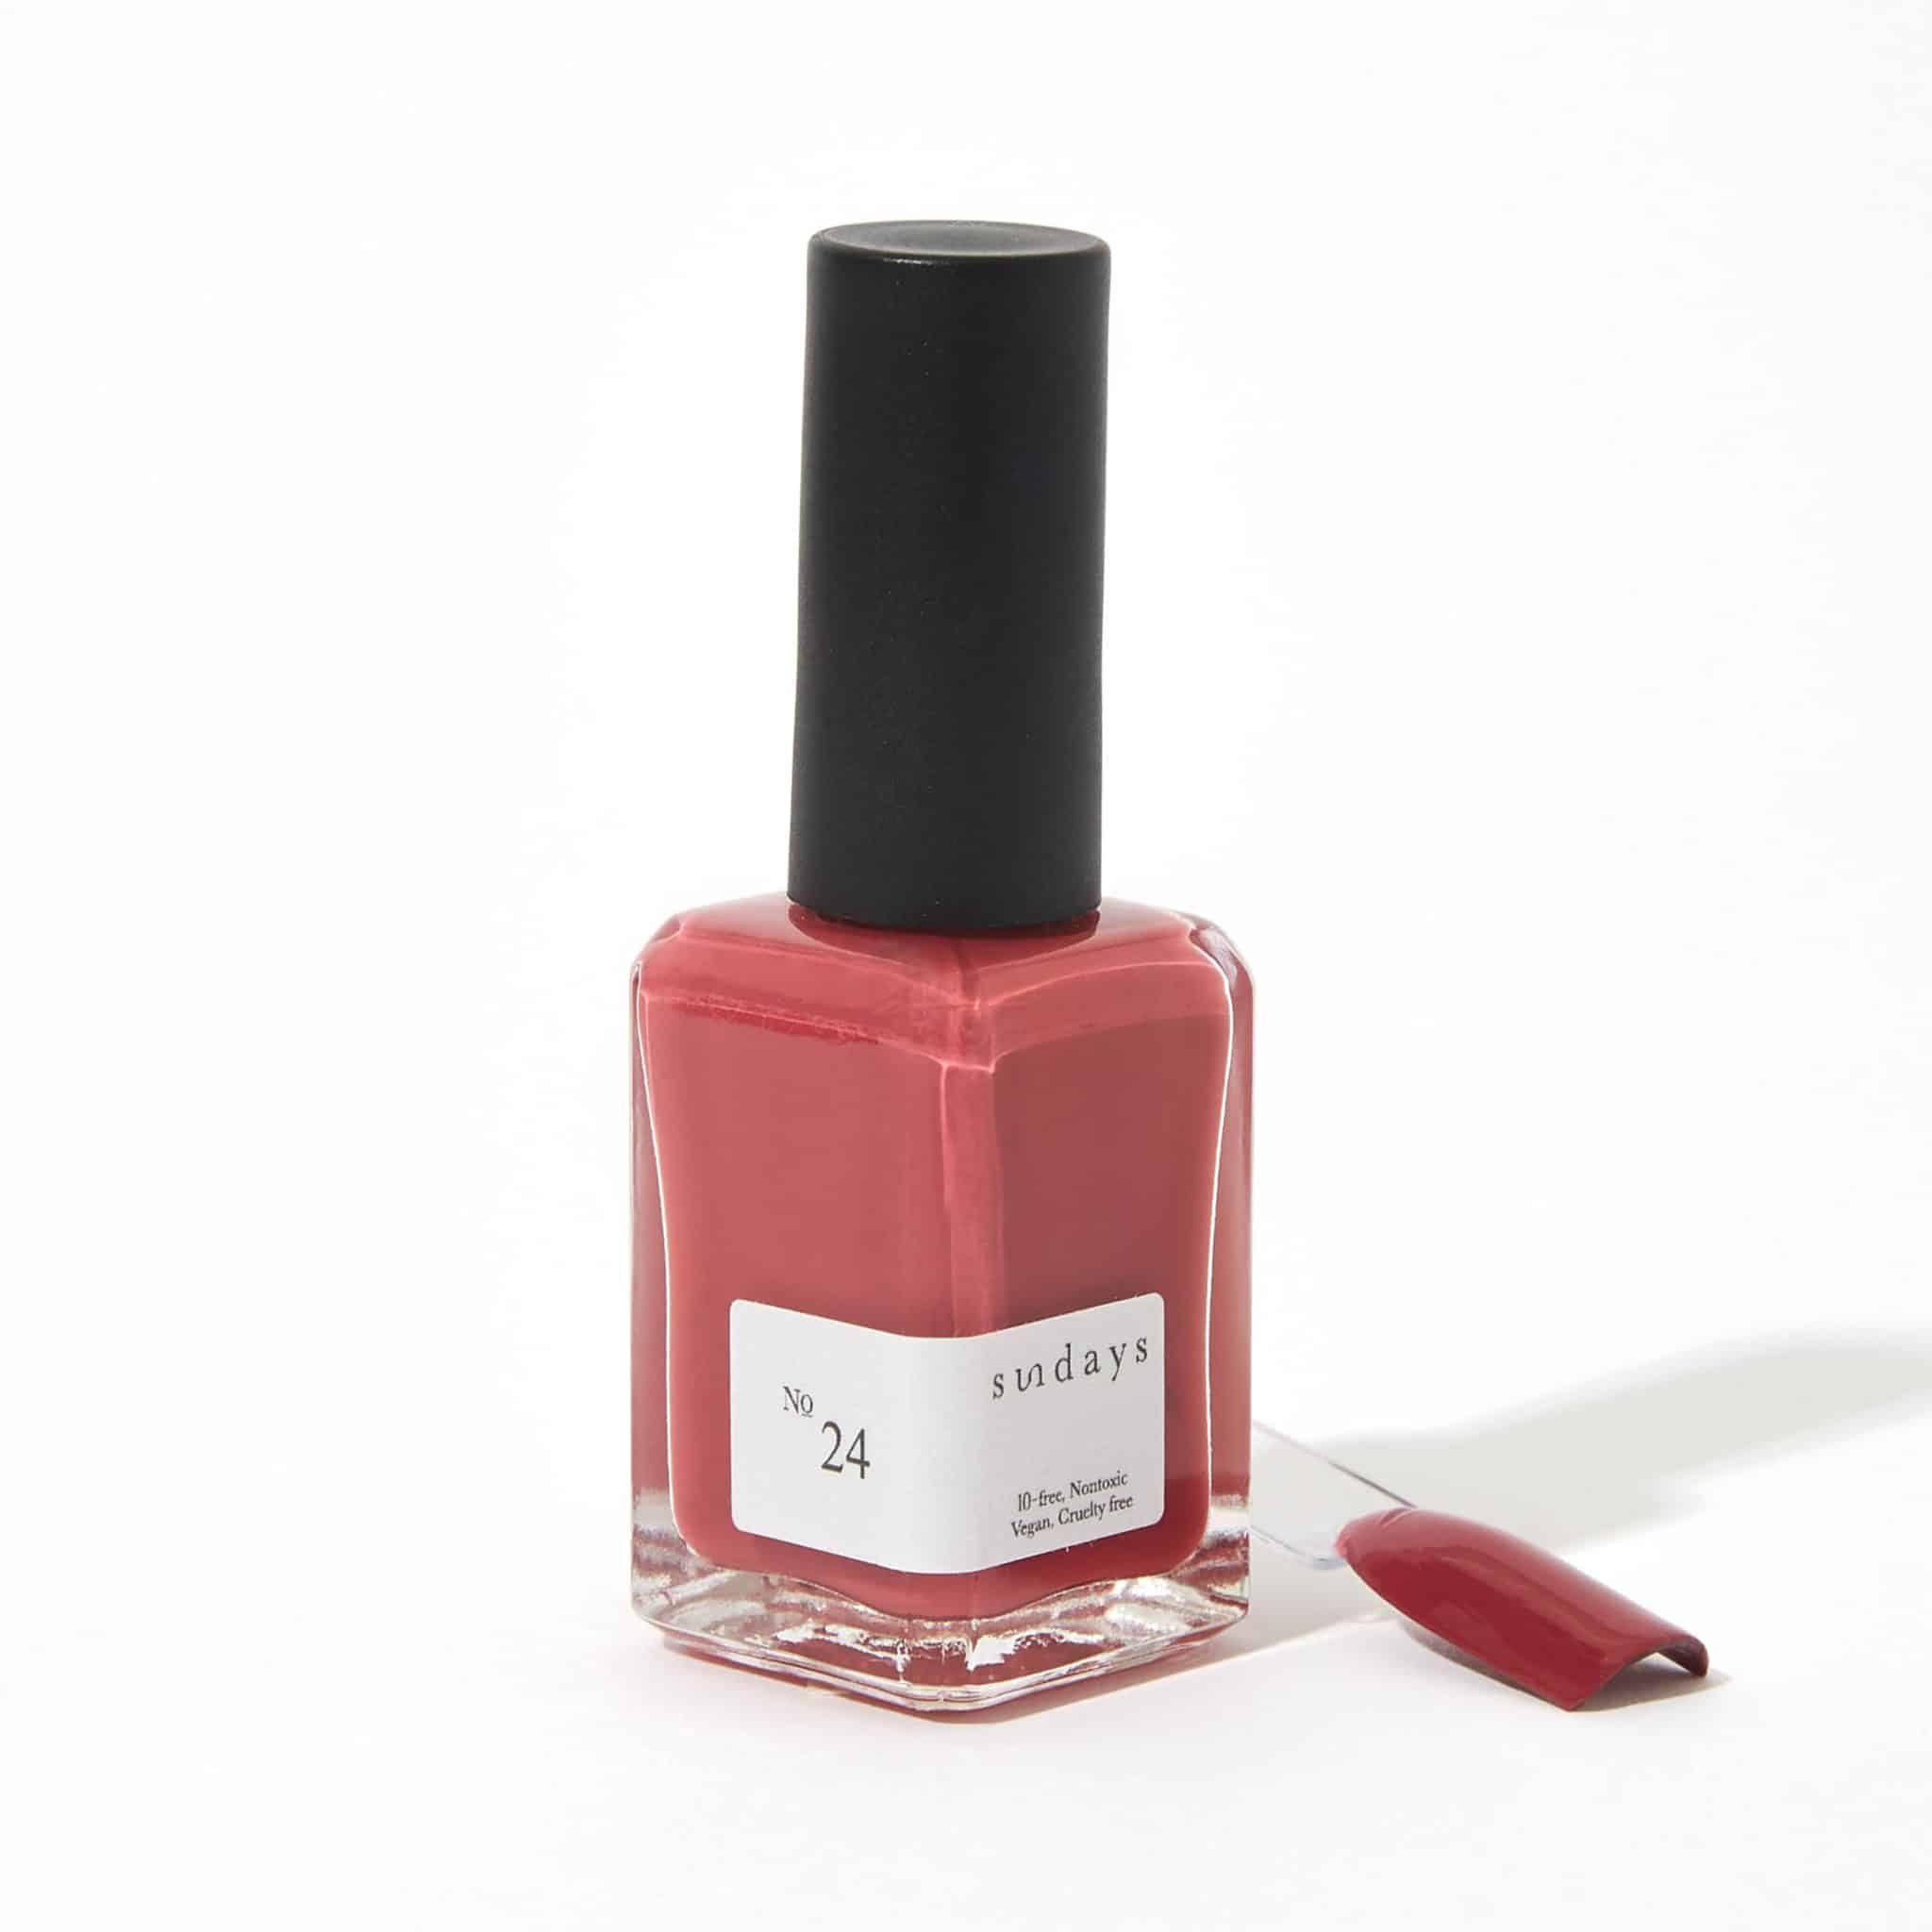 Non-toxic nail polish in pink berry